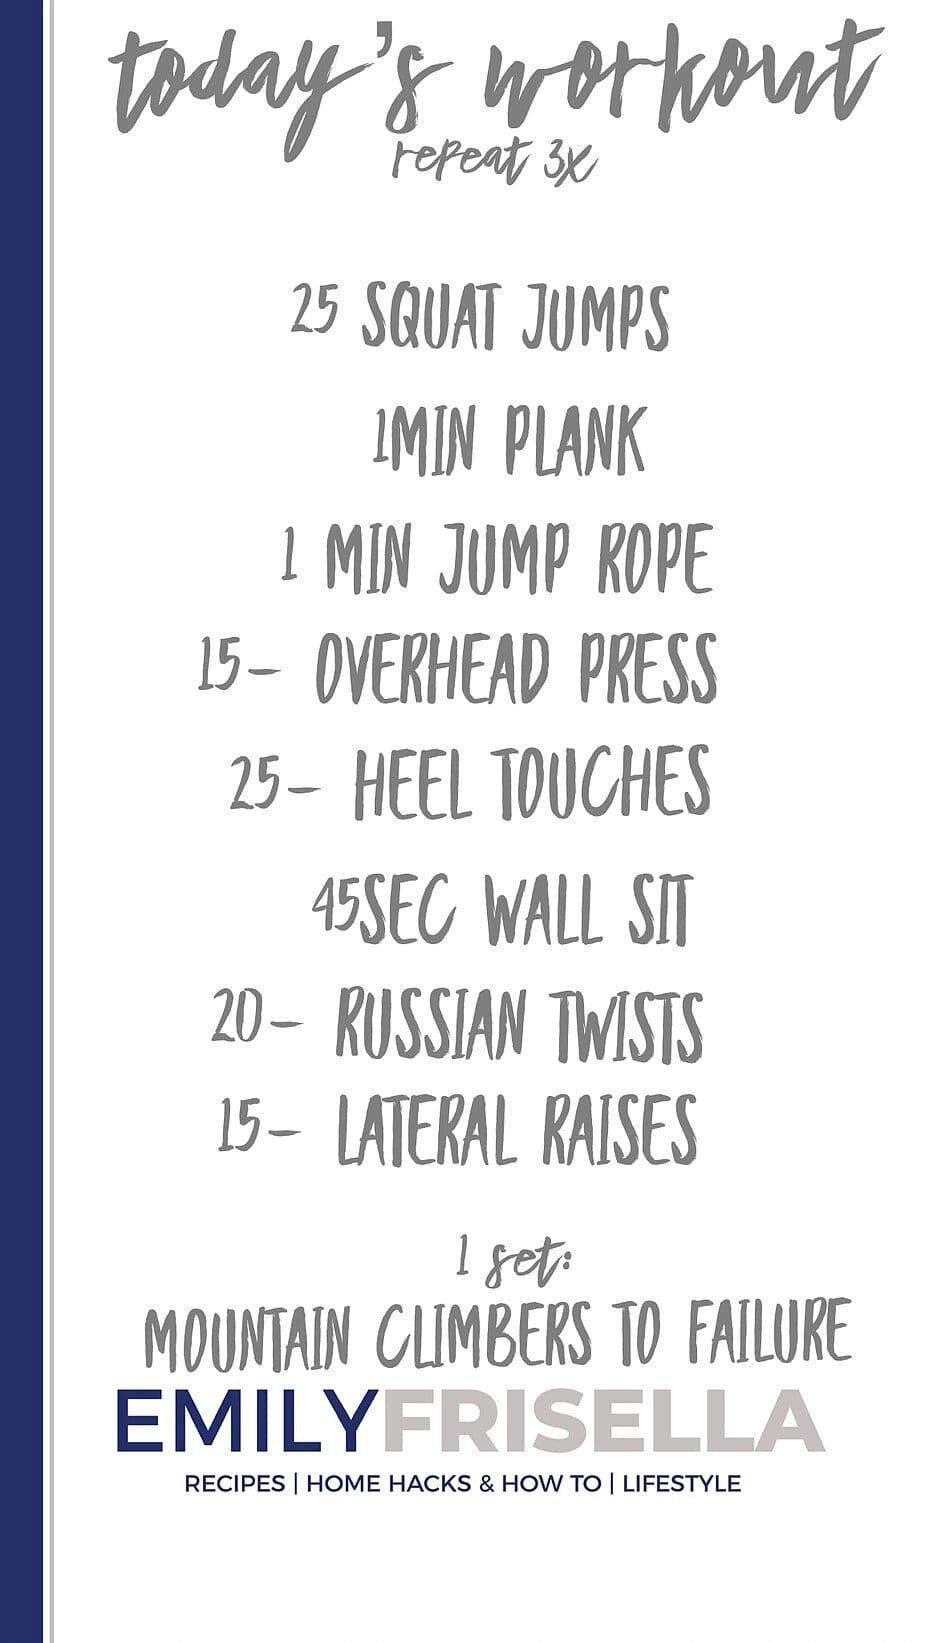 Workout of the week: 30-min full-body workout